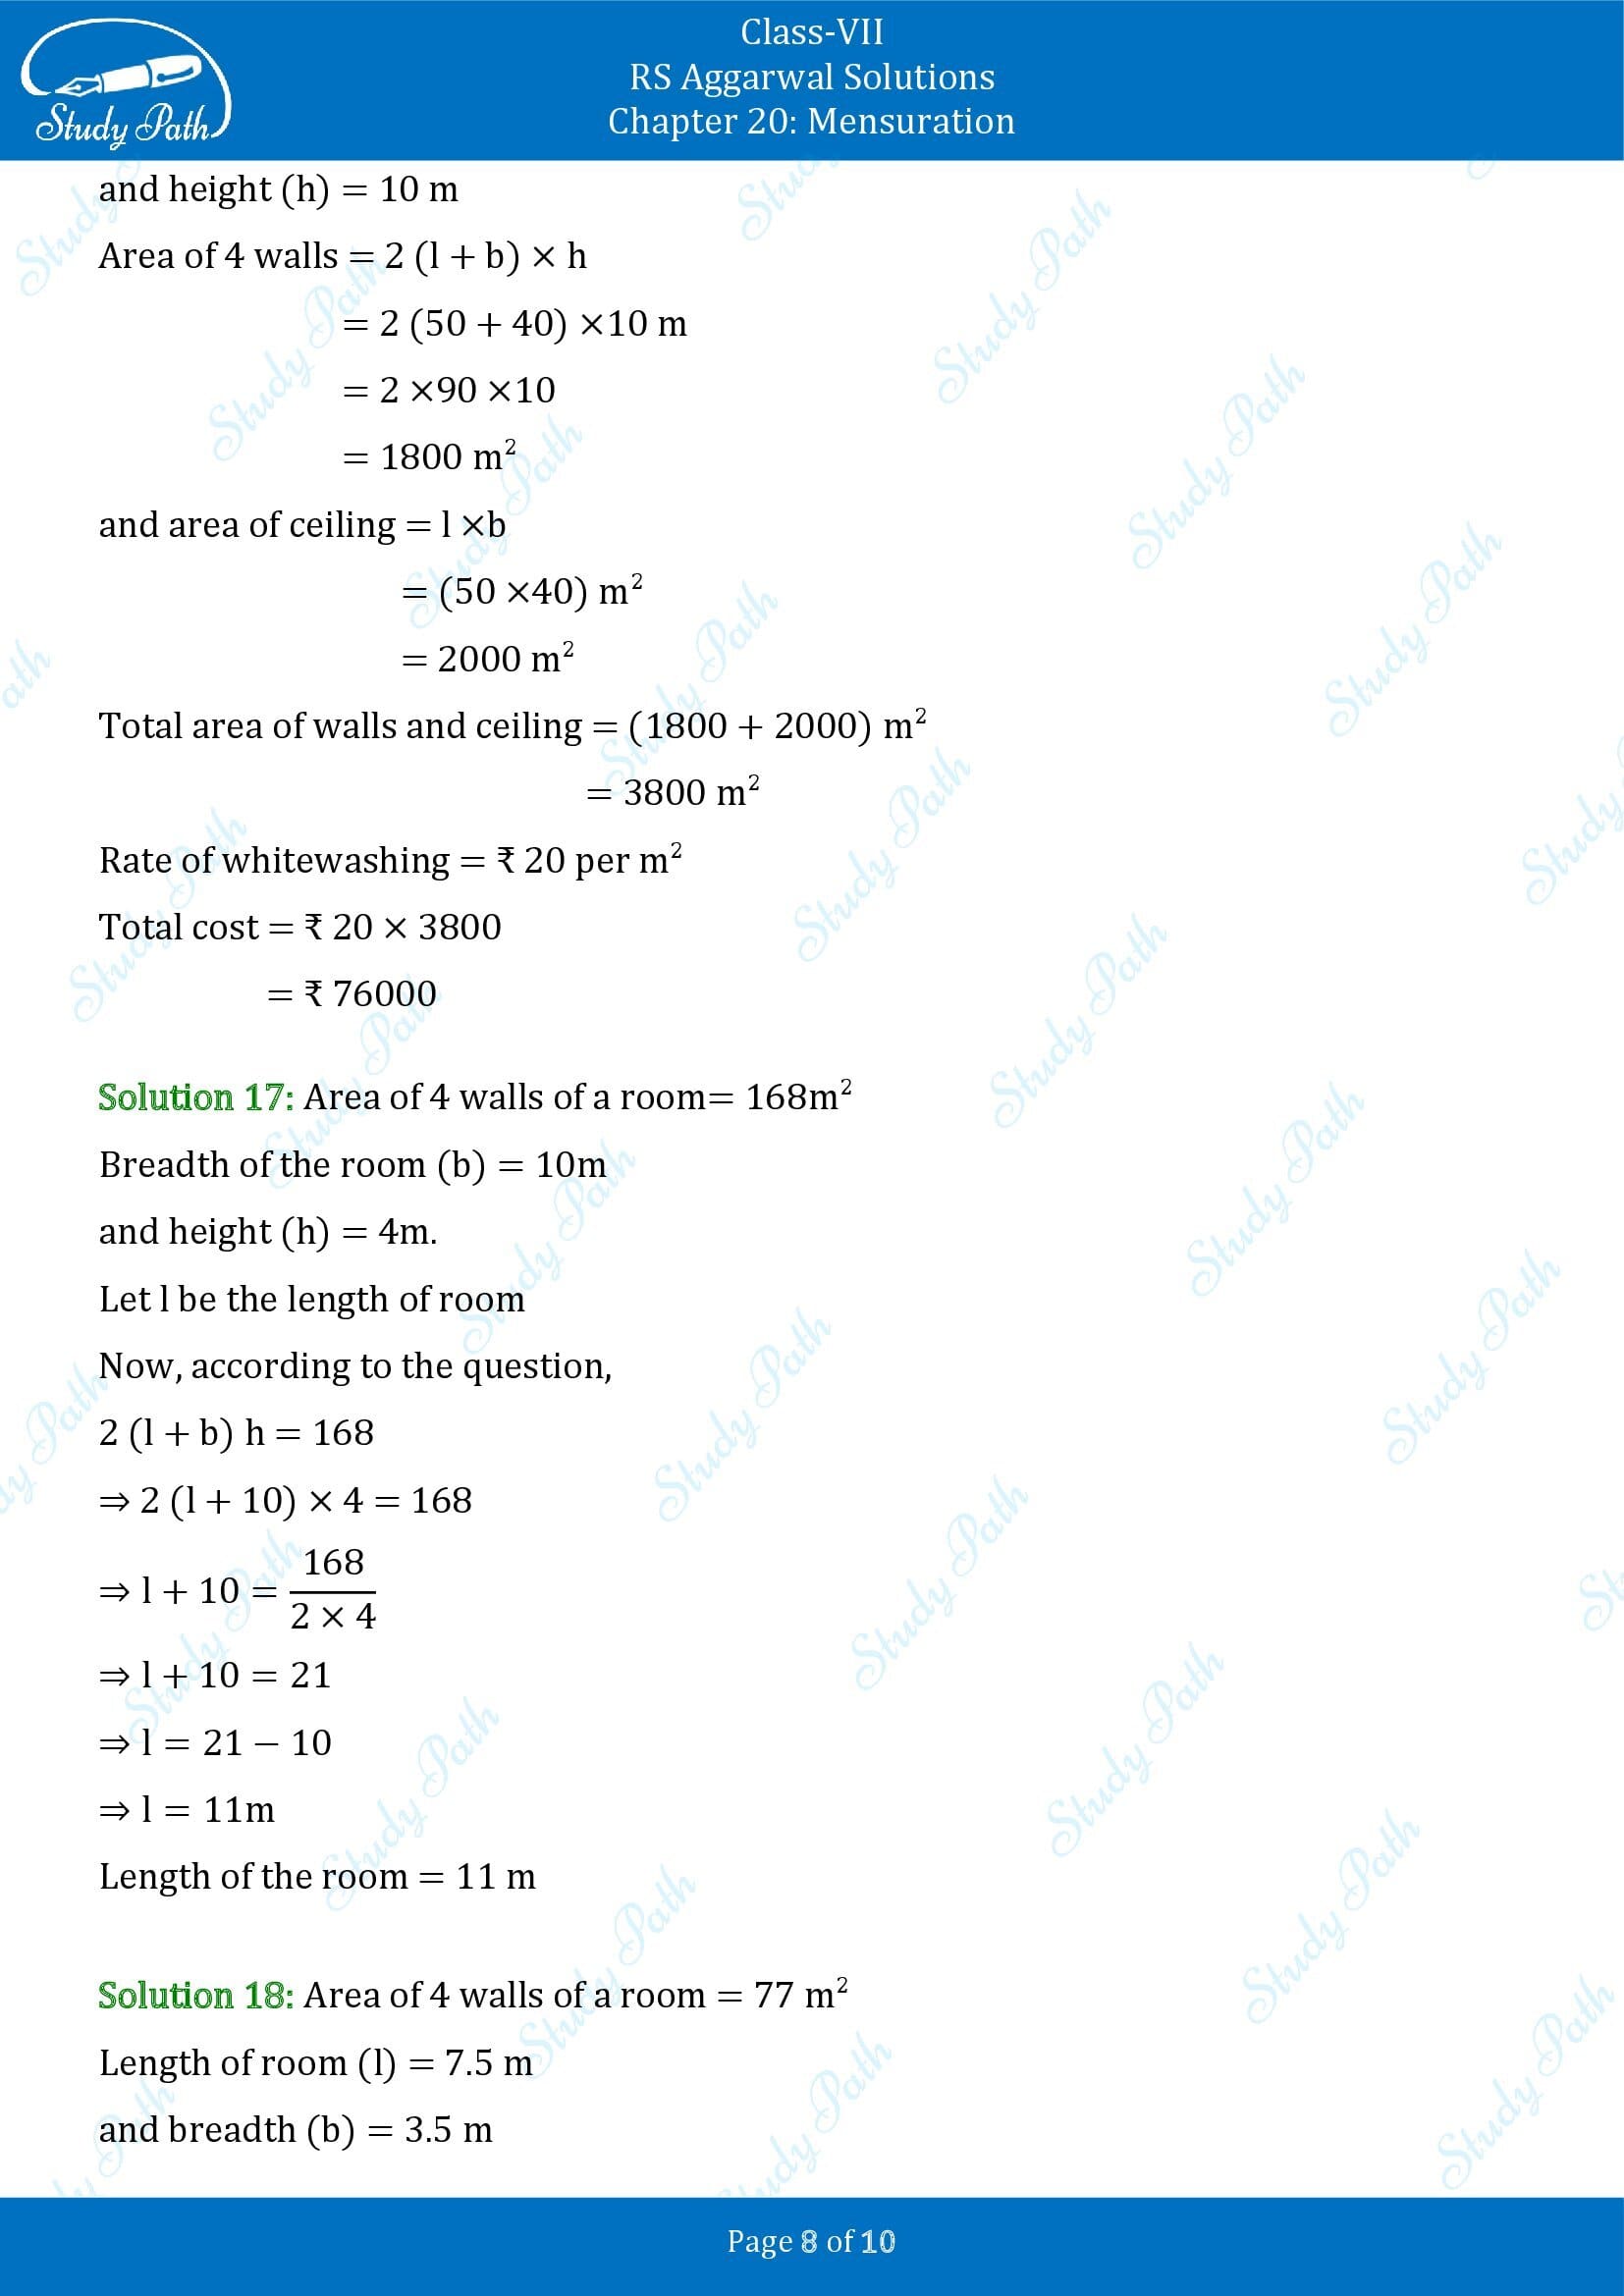 RS Aggarwal Solutions Class 7 Chapter 20 Mensuration Exercise 20A 00008